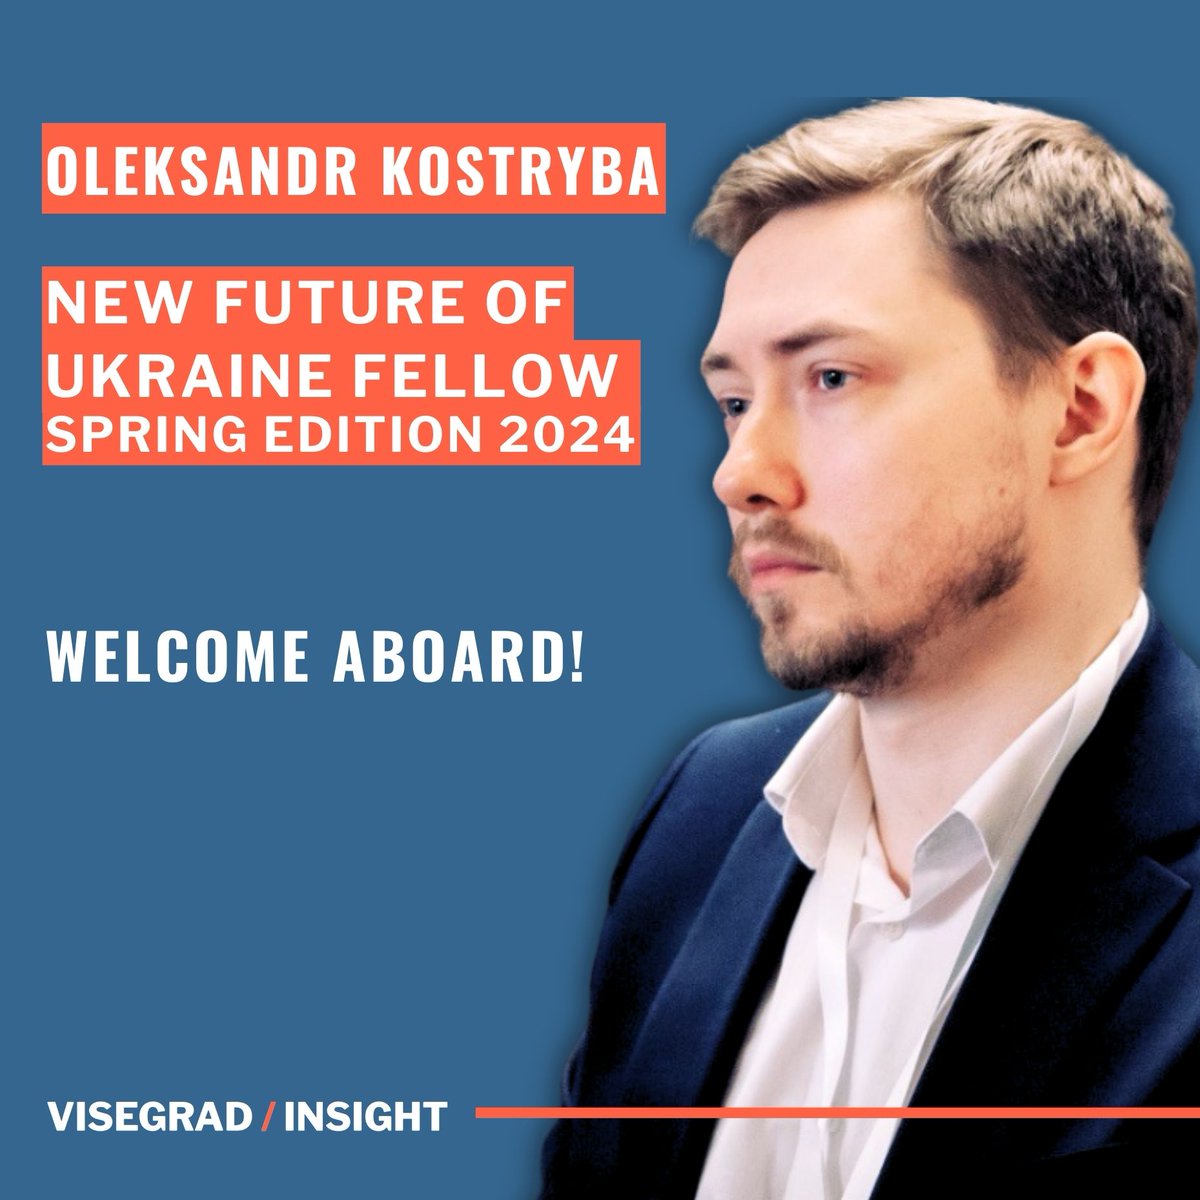 #EU enlargement 🇪🇺 should not be perceived as charity, but as an investment in the long-term security and democratic development of the Union, says Oleksandr Kostryba. Welcome our new FUTURE OF UKRAINE FELLOW❗️🇺🇦 🔸 Oleksandr is a researcher and public policy expert with…